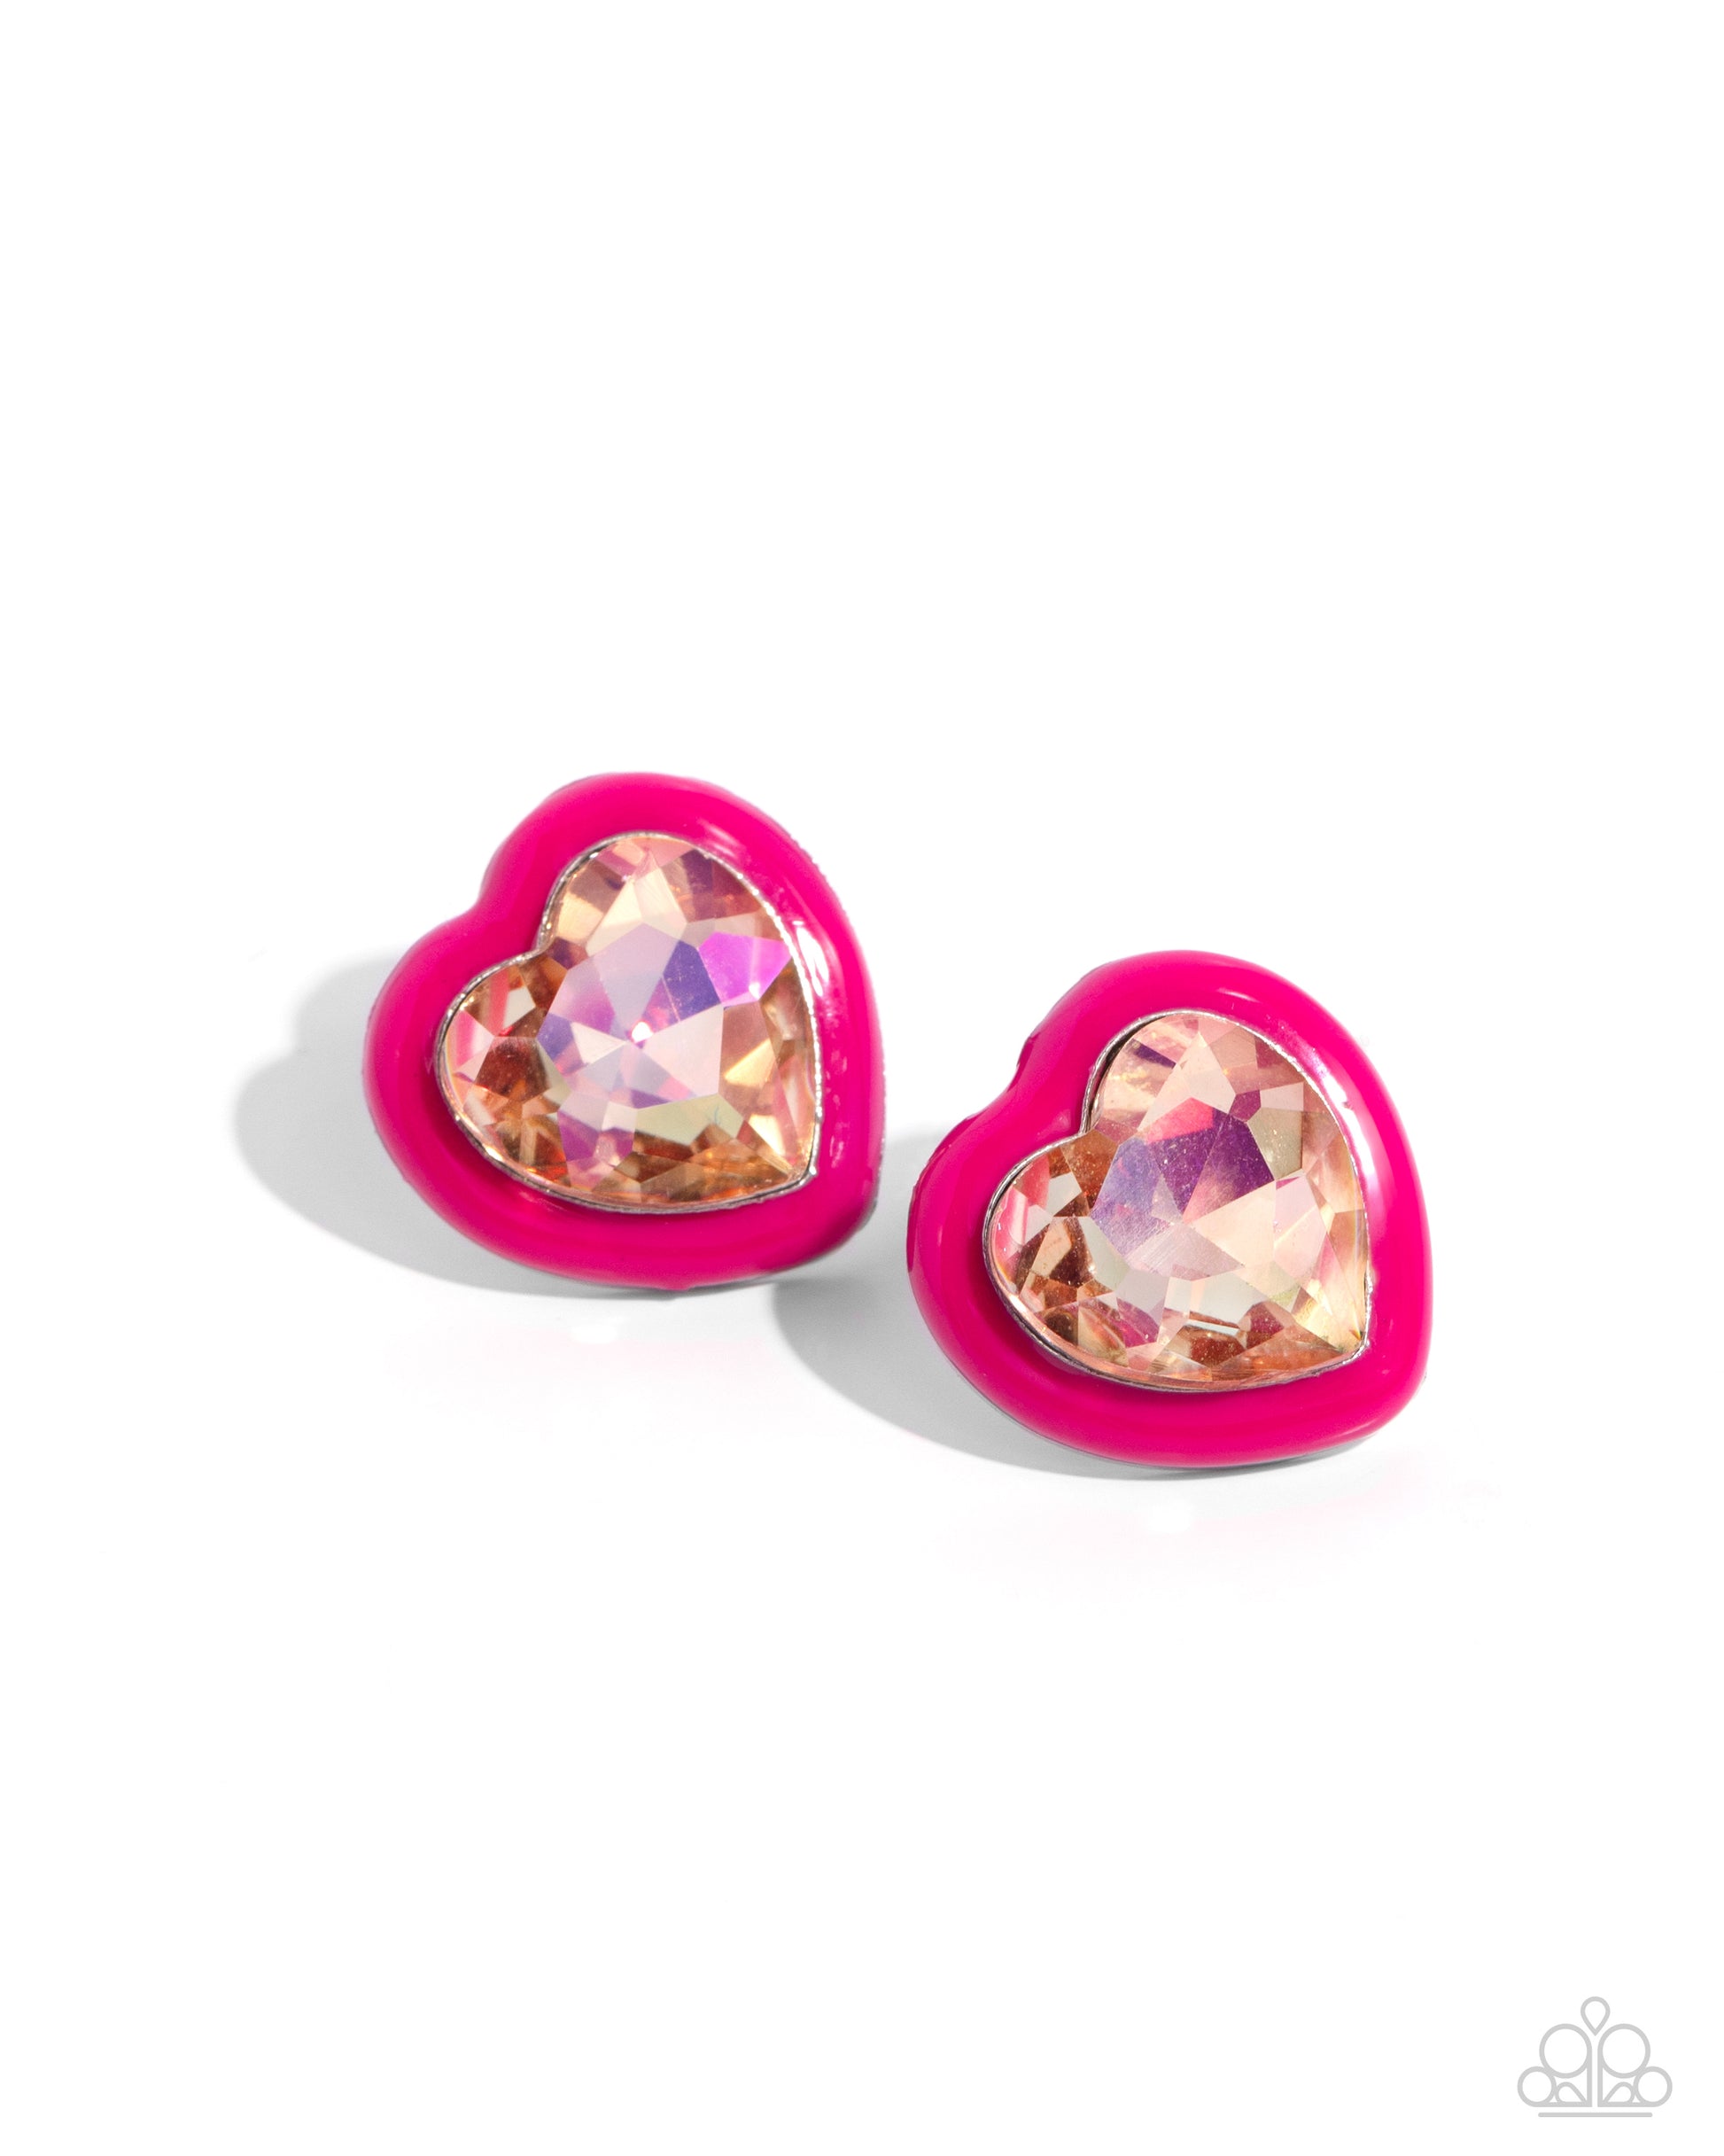 <p>Pressed in a border of Pink Peacock paint, an oversized UV shimmery heart gem glimmers from the ear, resulting in a romantic-inspired display. Earring attaches to a standard post fitting.</p> <p><i> Sold as one pair of post earrings.</i></p>